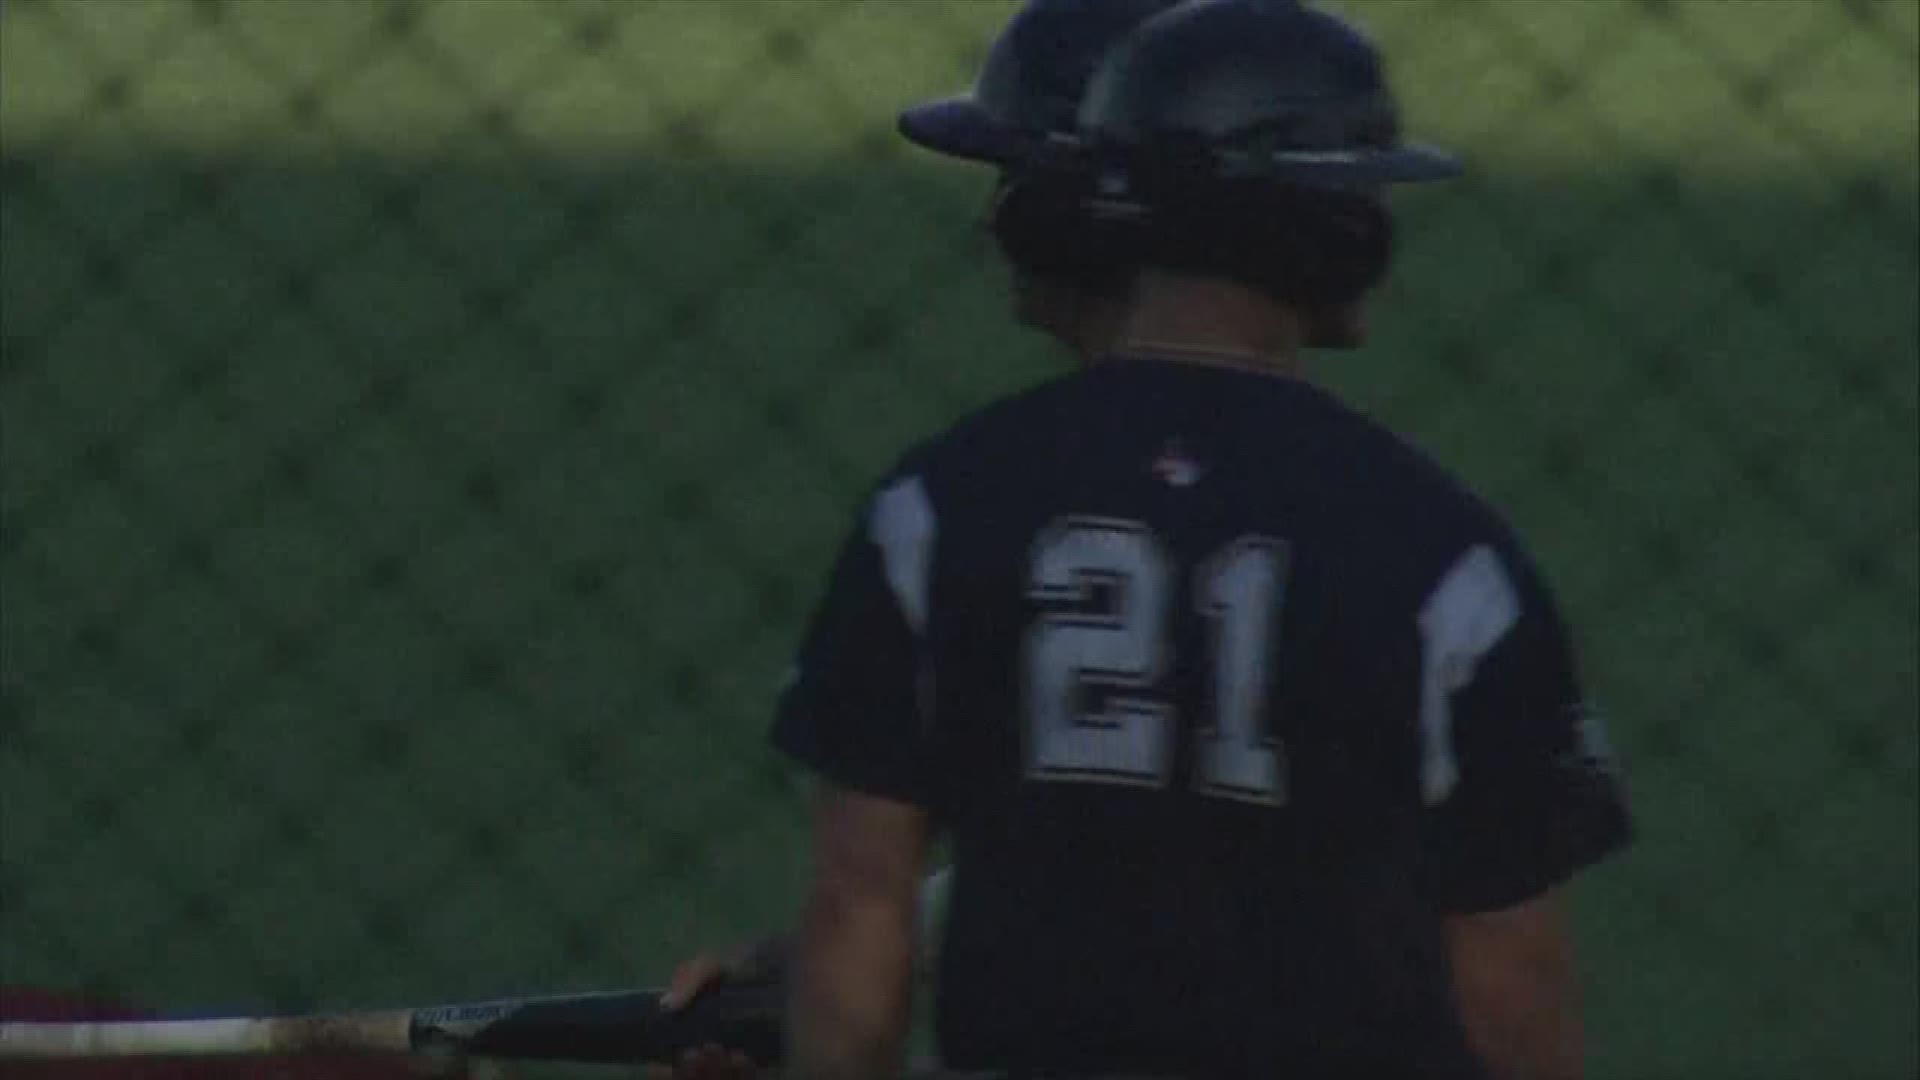 The Brazos Valley Bombers defeated the Texas Marshalls 9-1 in their home opener on Thursday.